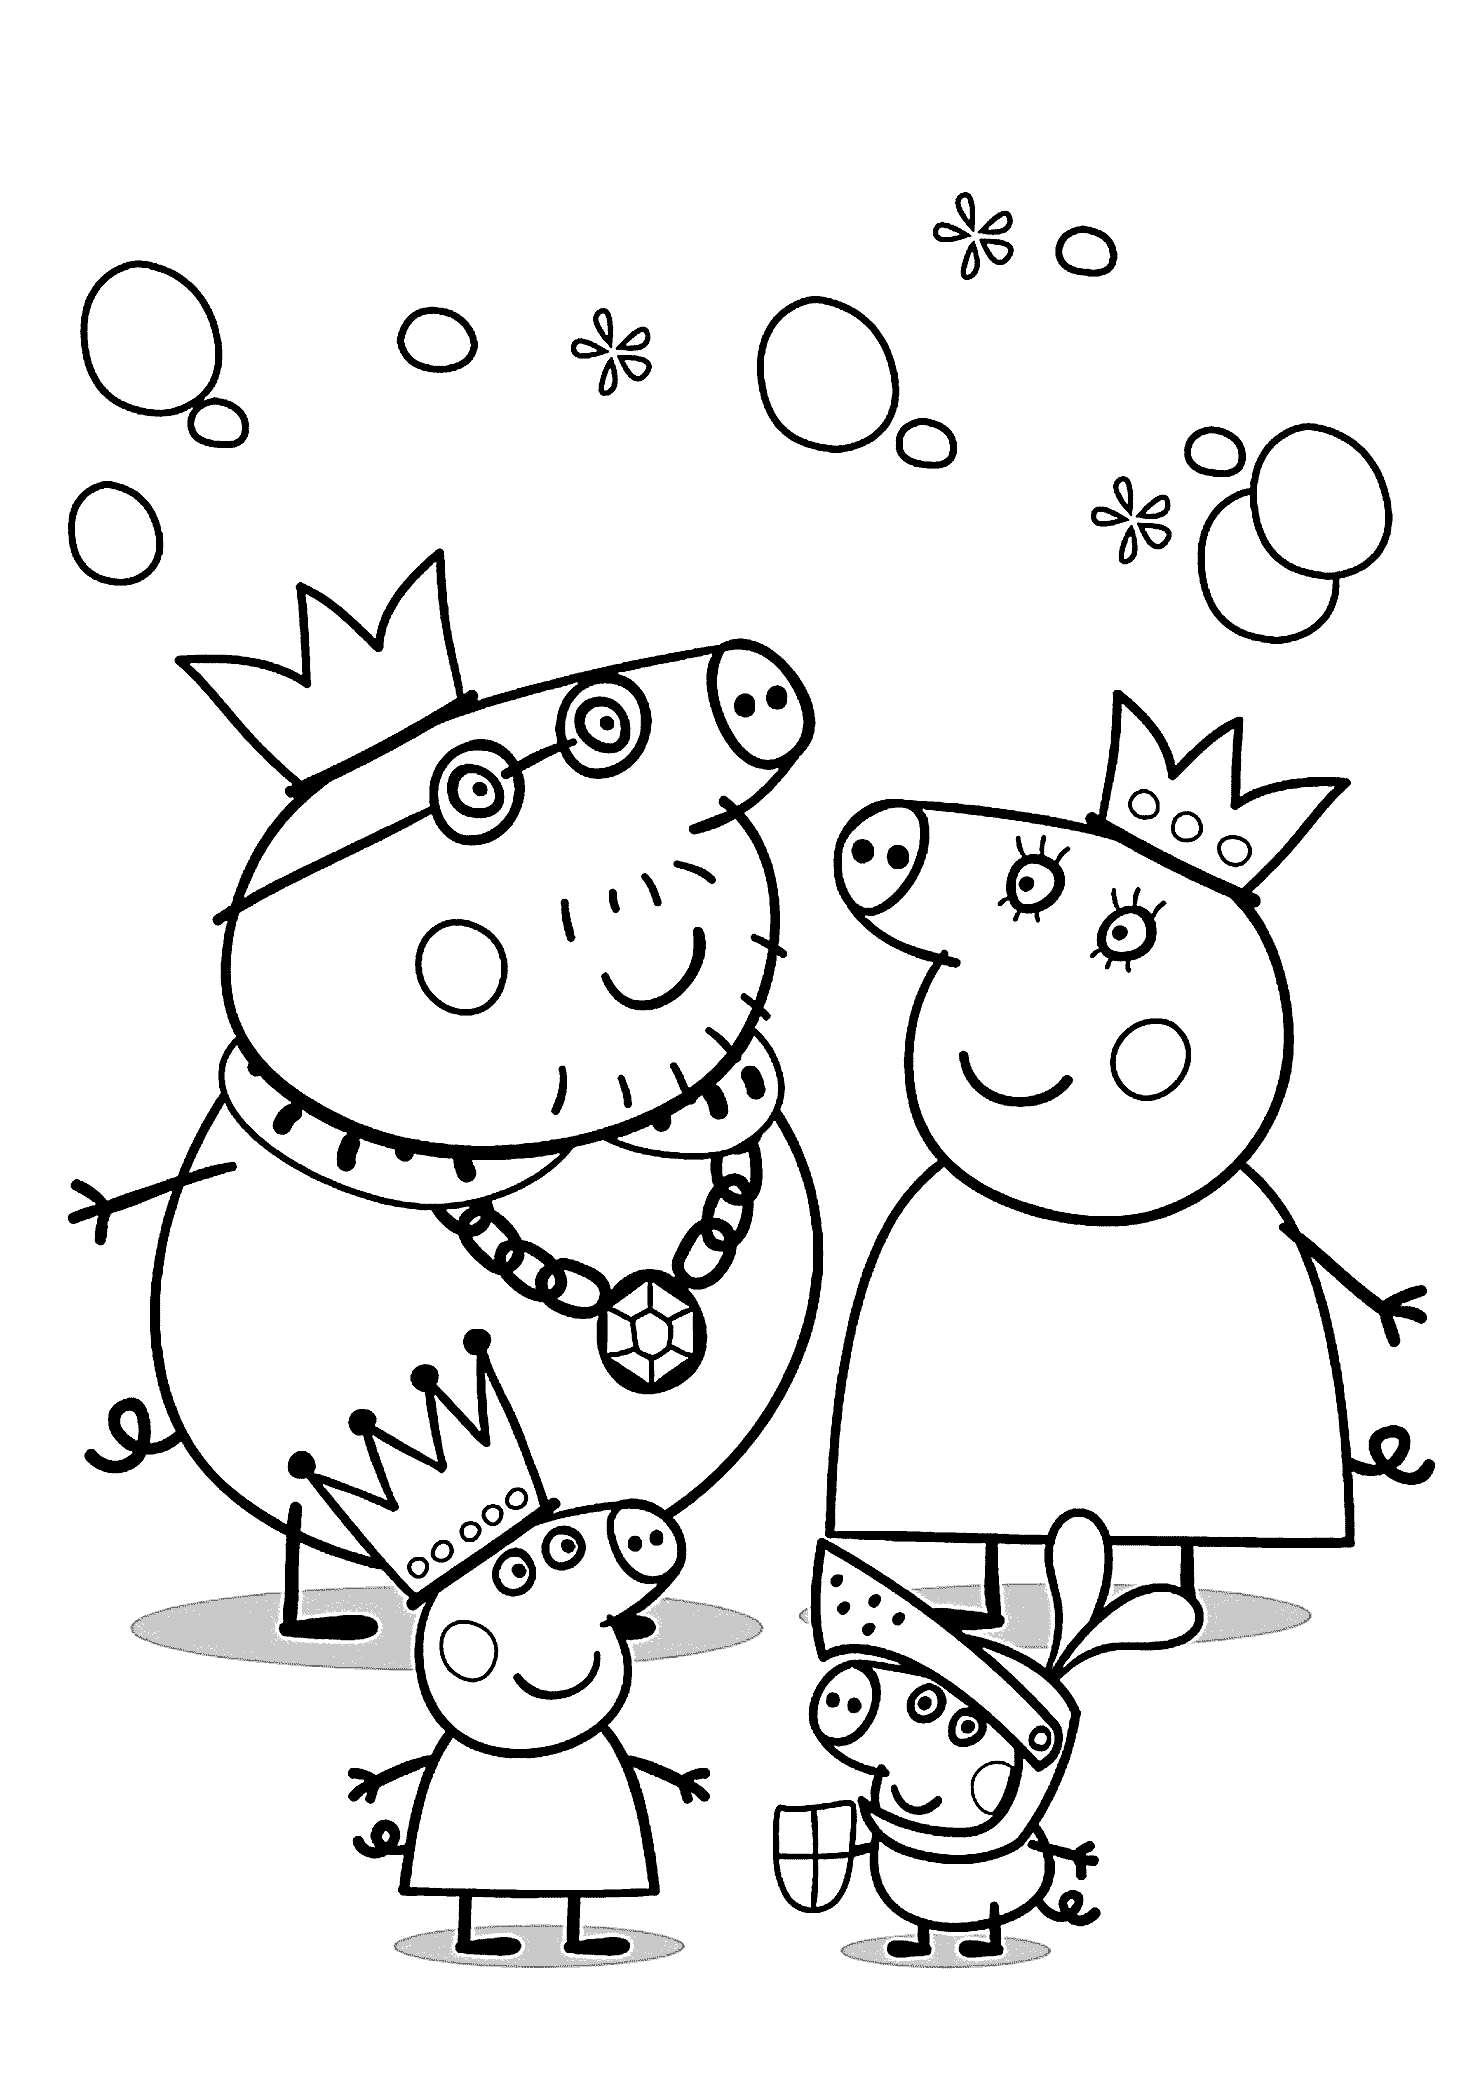 Peppa Pig Coloring Pages For Kids Printable Free Peppa Pig Coloring Pages Peppa Pig C